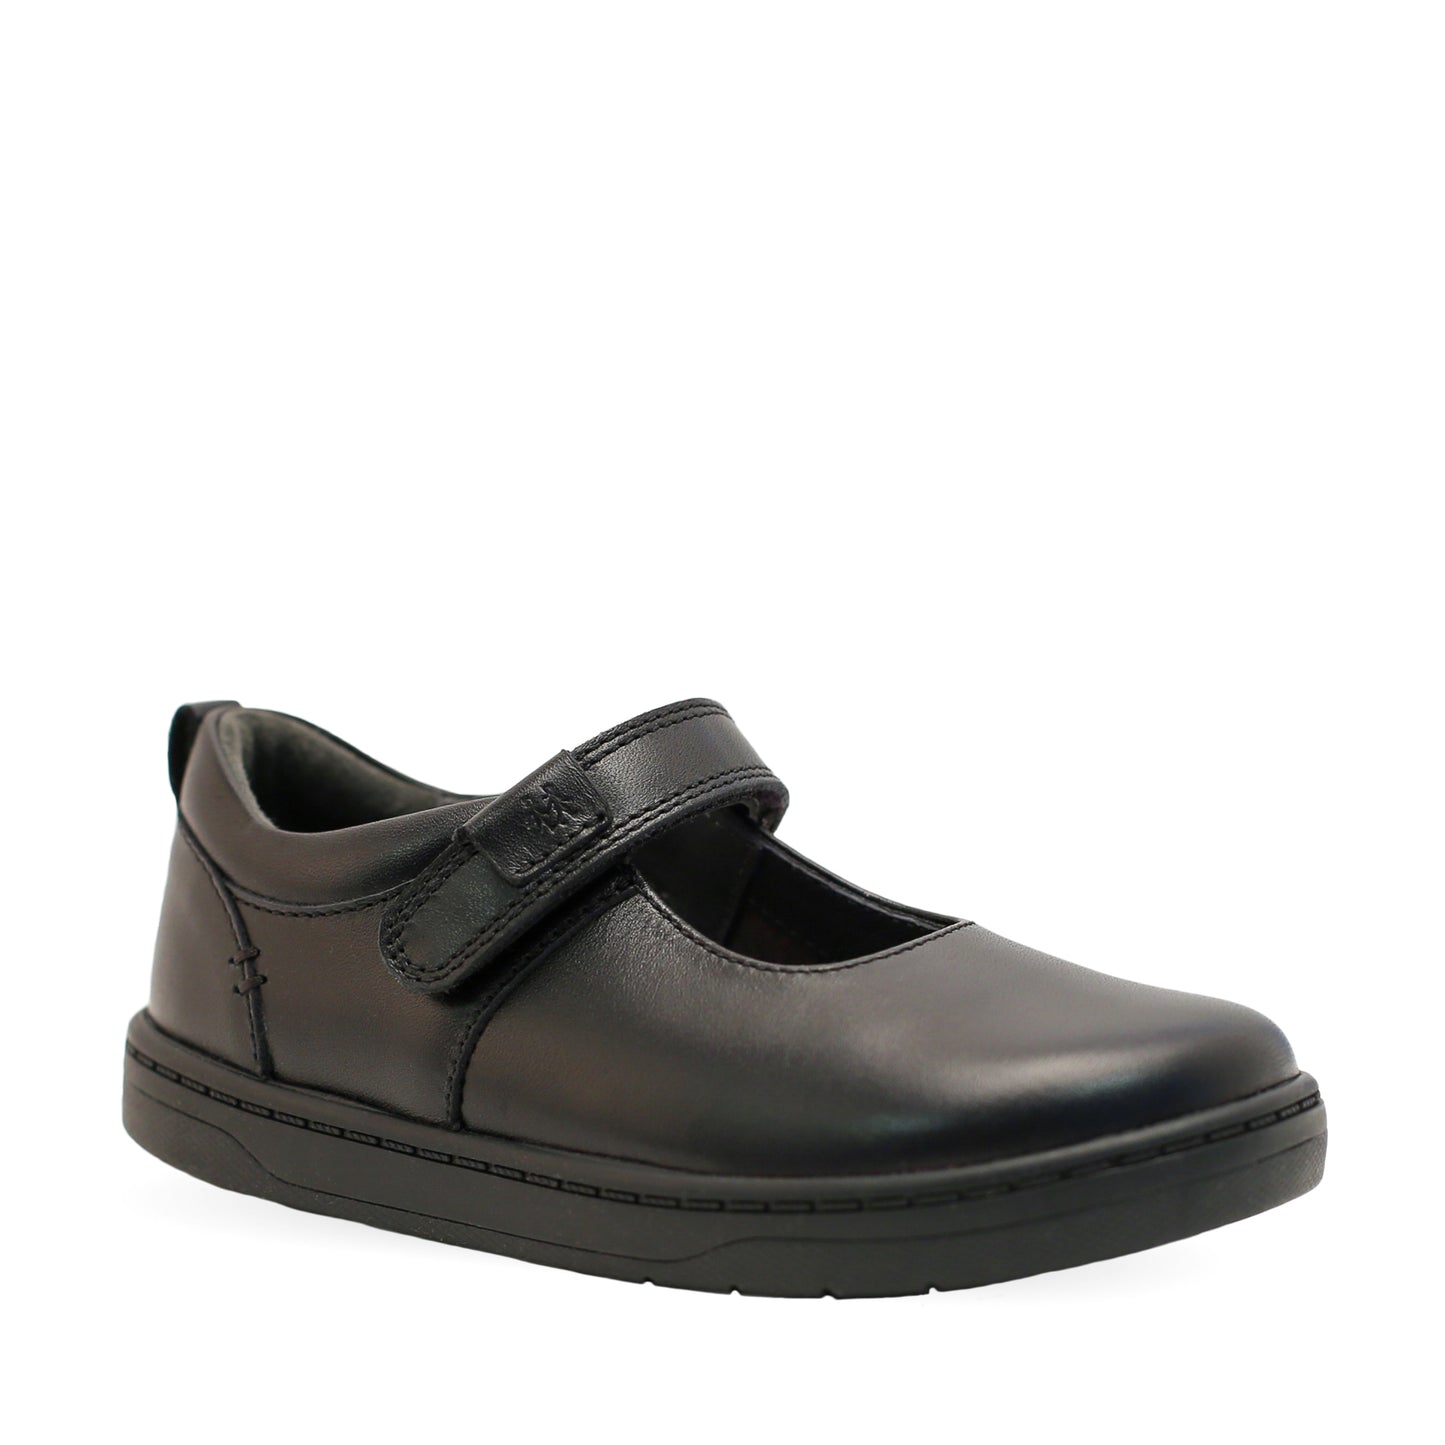 Mystery Girl's Black Leather First School Shoe